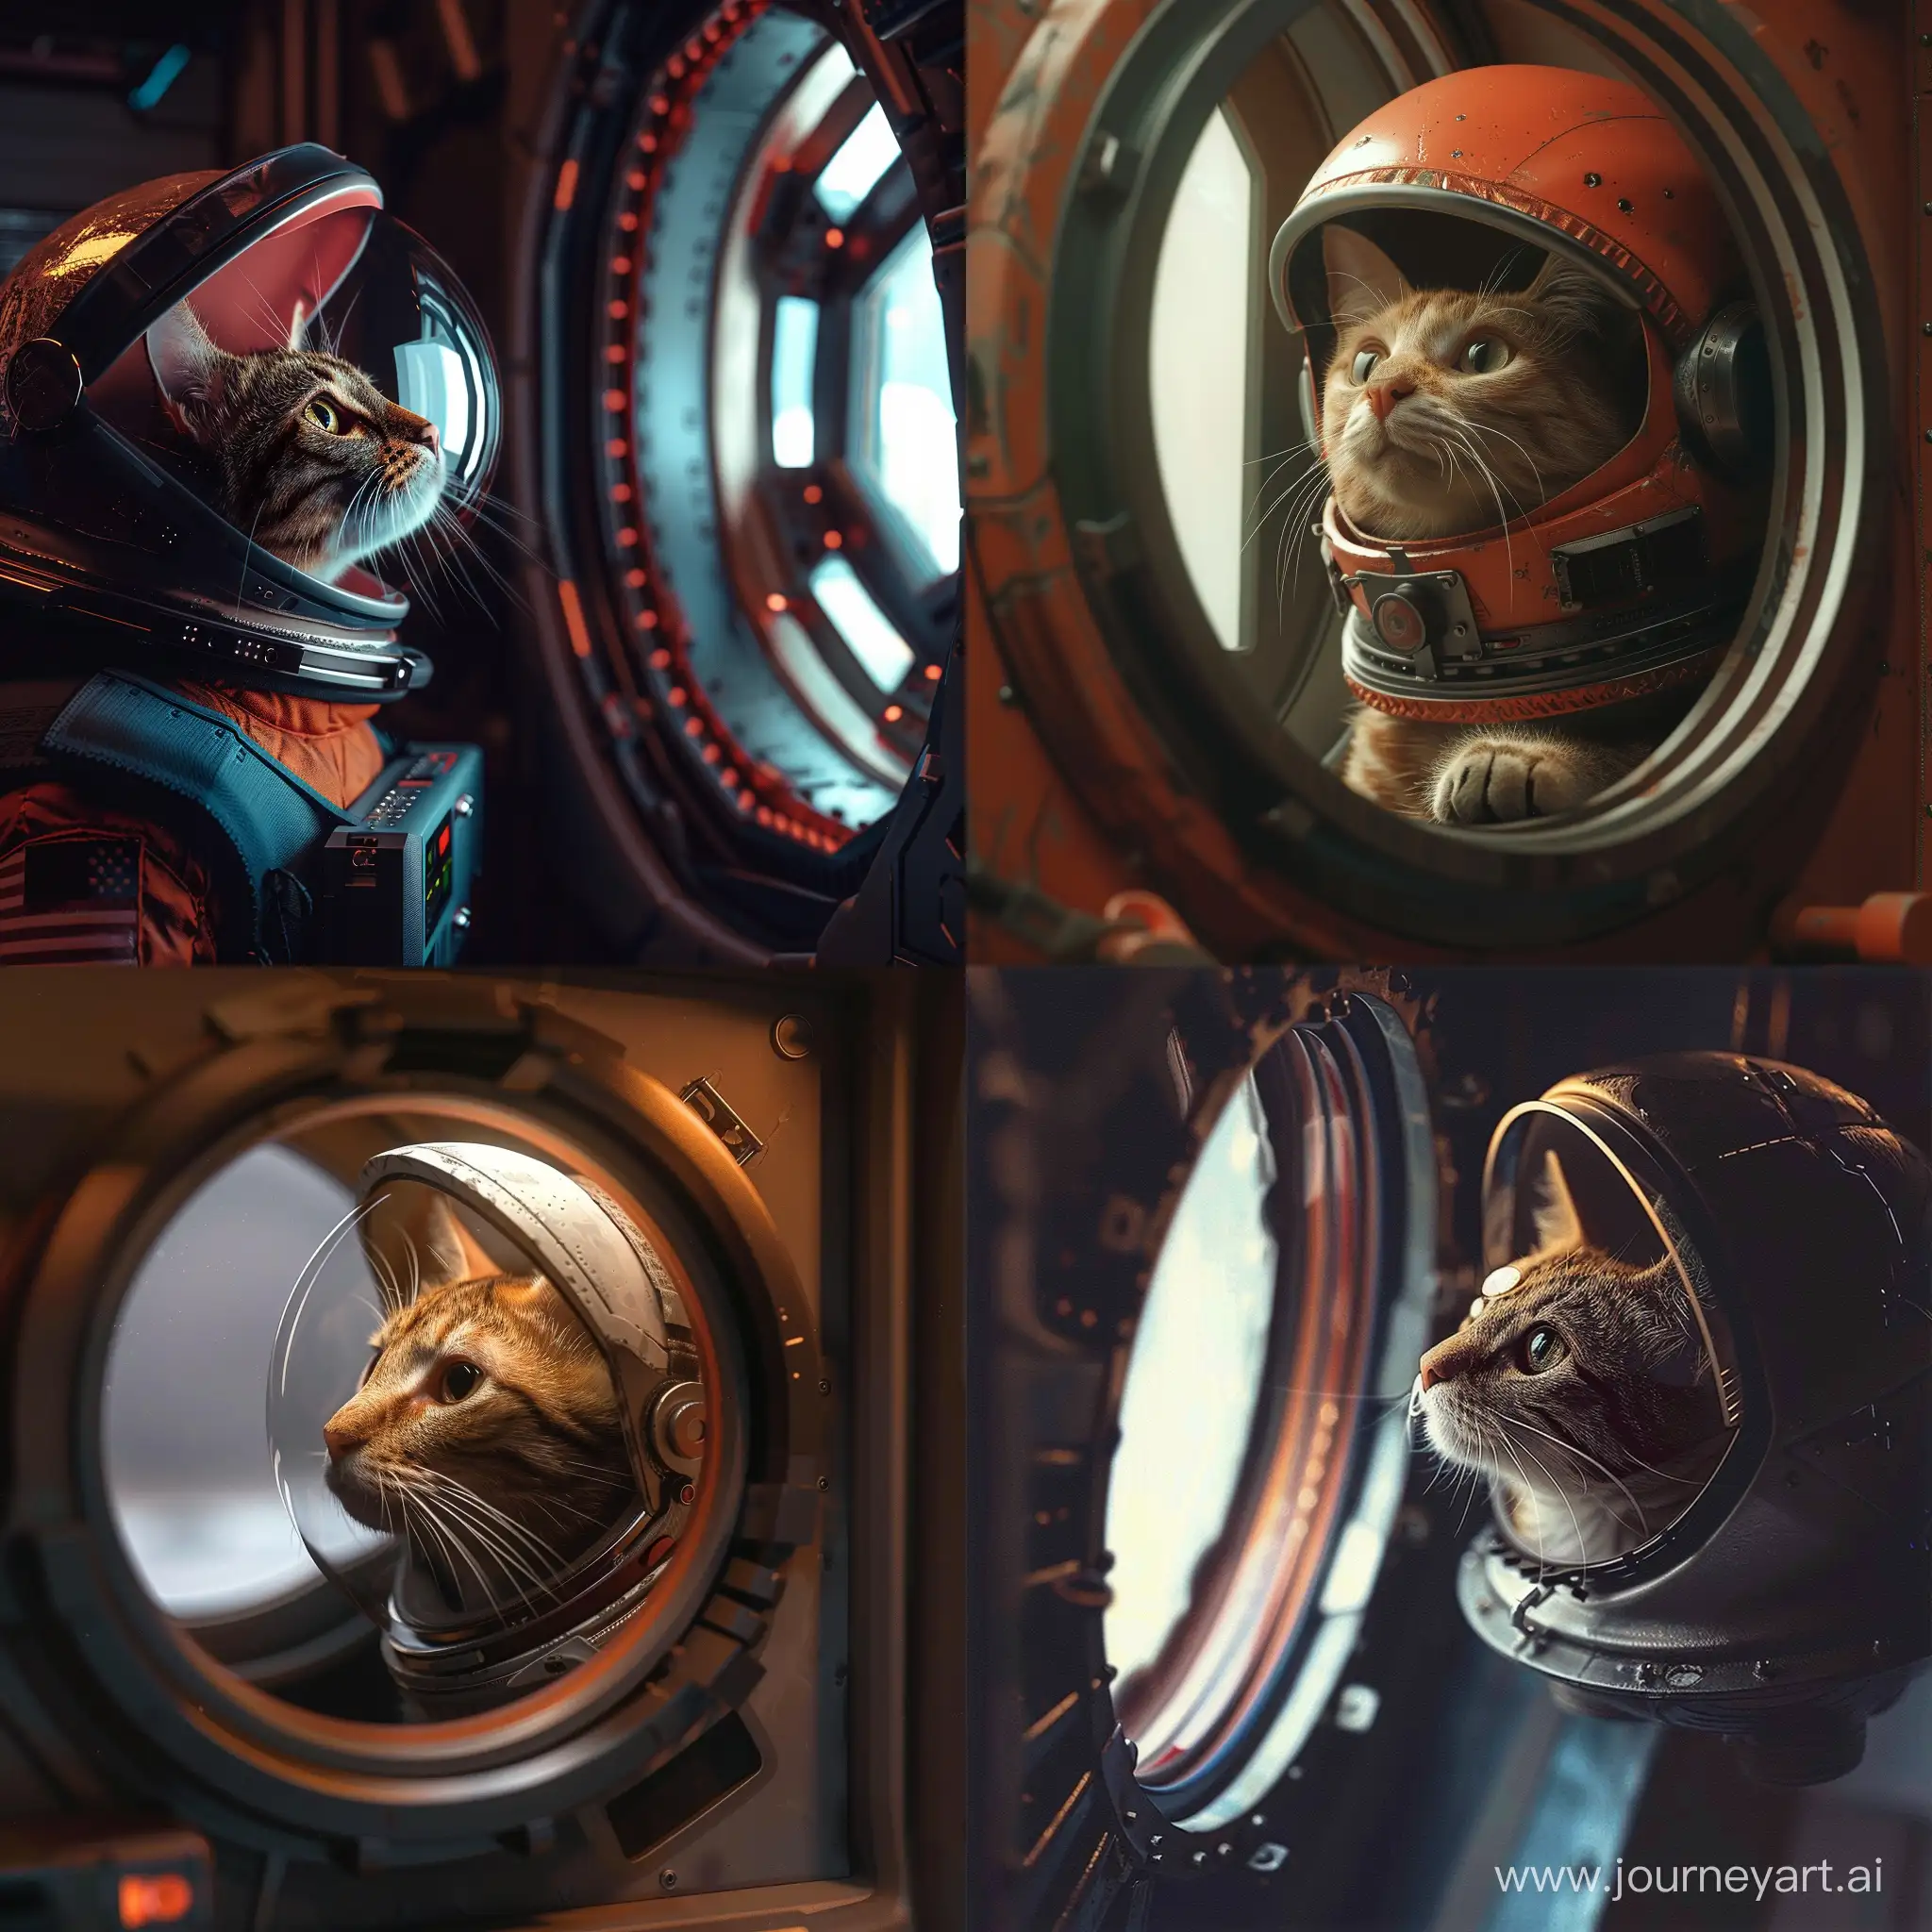 A photorealistic image of a cat wearing a tiny astronaut helmet, peering out a spaceship window. --v 6 --ar 1:1 --no 53379